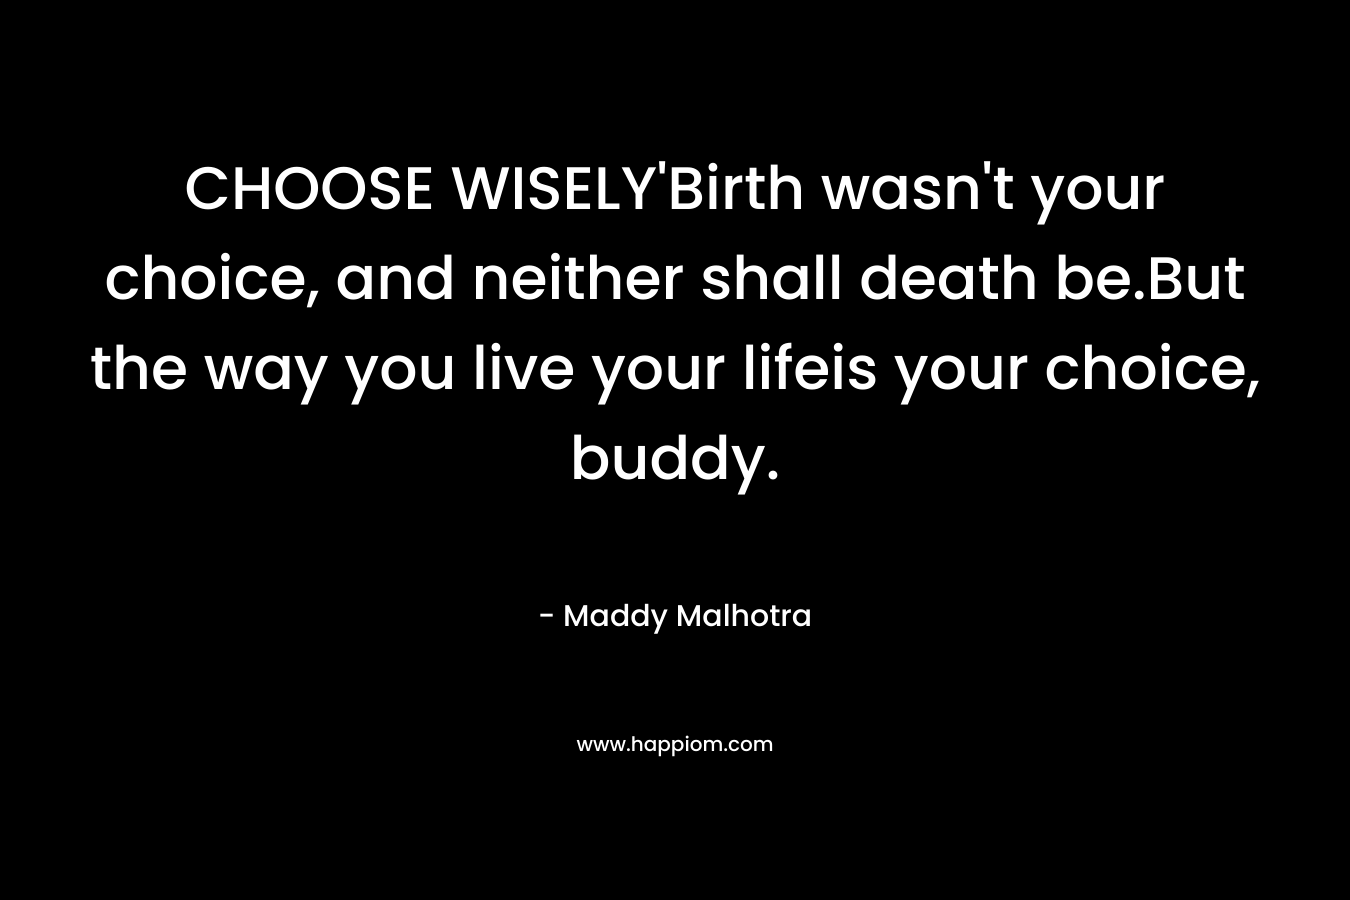 CHOOSE WISELY’Birth wasn’t your choice, and neither shall death be.But the way you live your lifeis your choice, buddy. – Maddy Malhotra